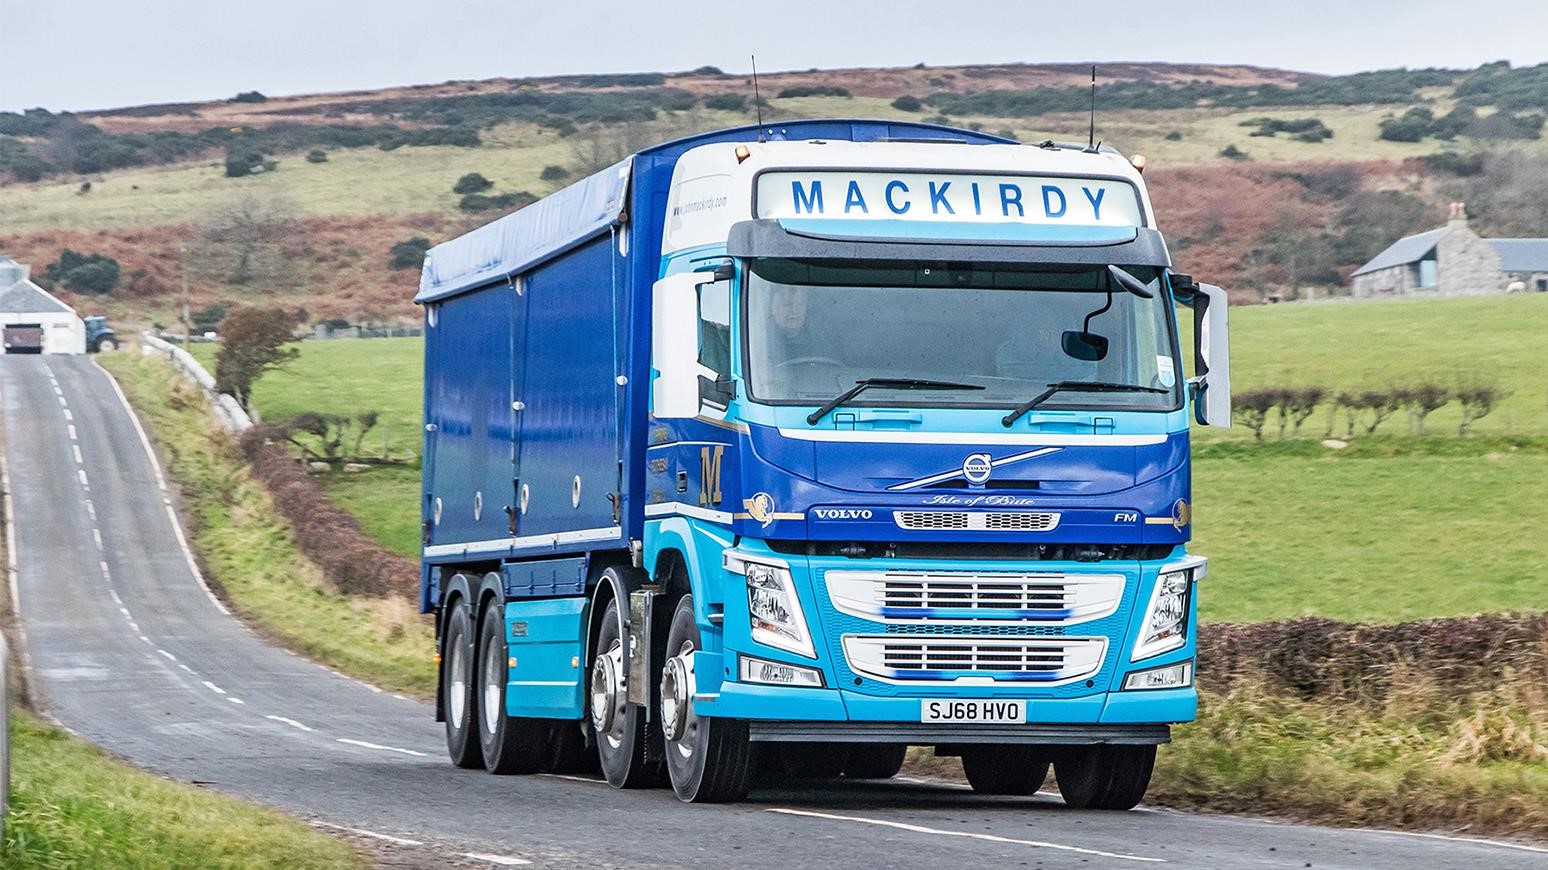 Isle Of Bute-Based John Mackirdy Ltd Adds New Volvo FM To Its Fleet To Deliver Animal Feed